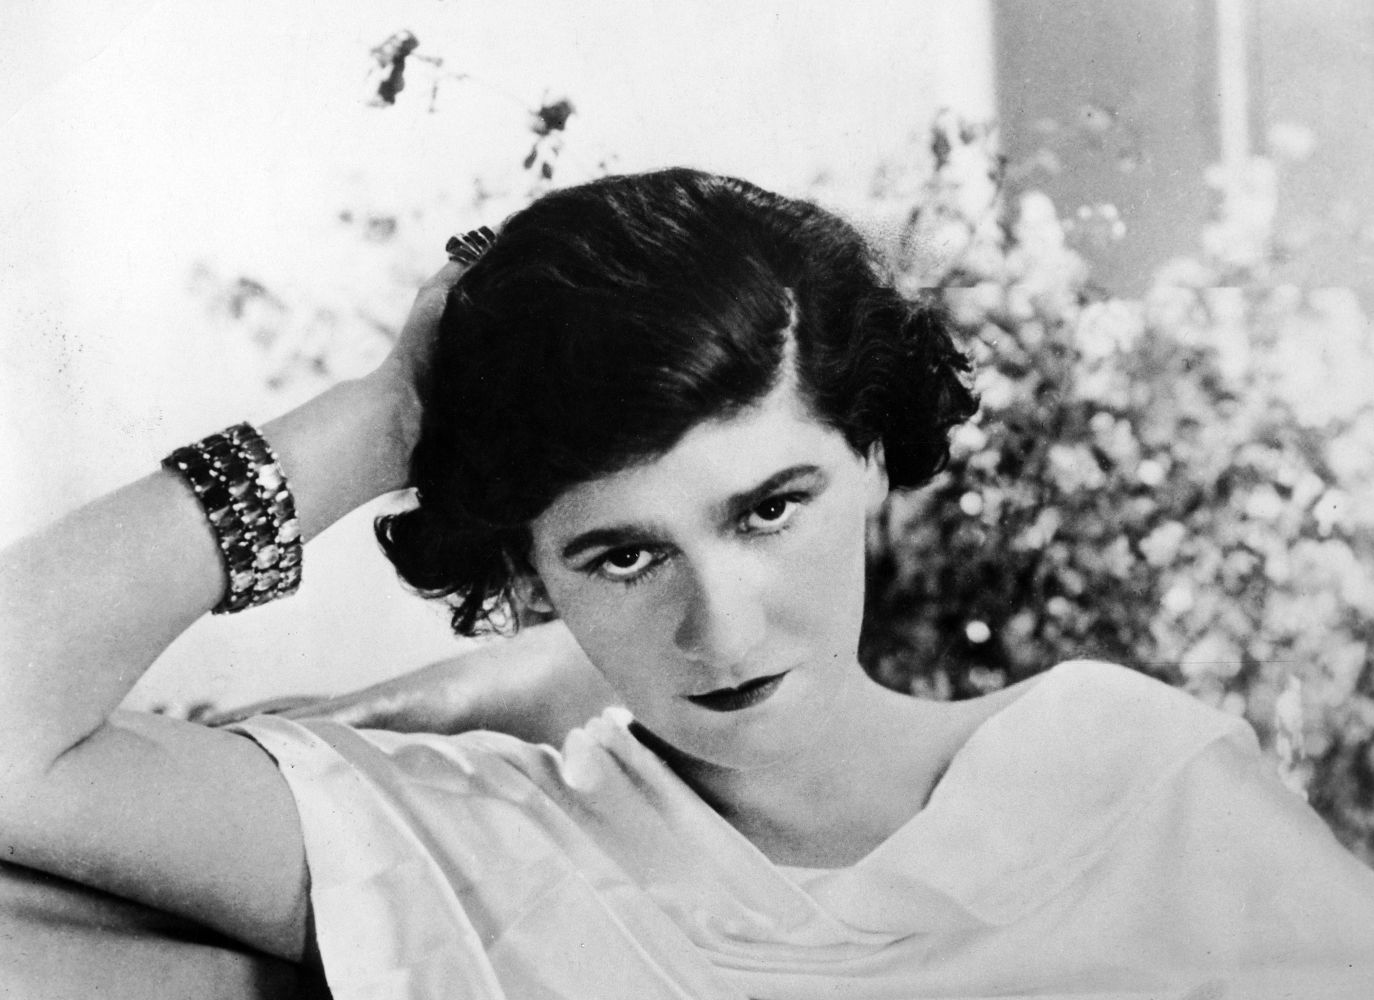 The Woman Behind the Label: Coco Chanel